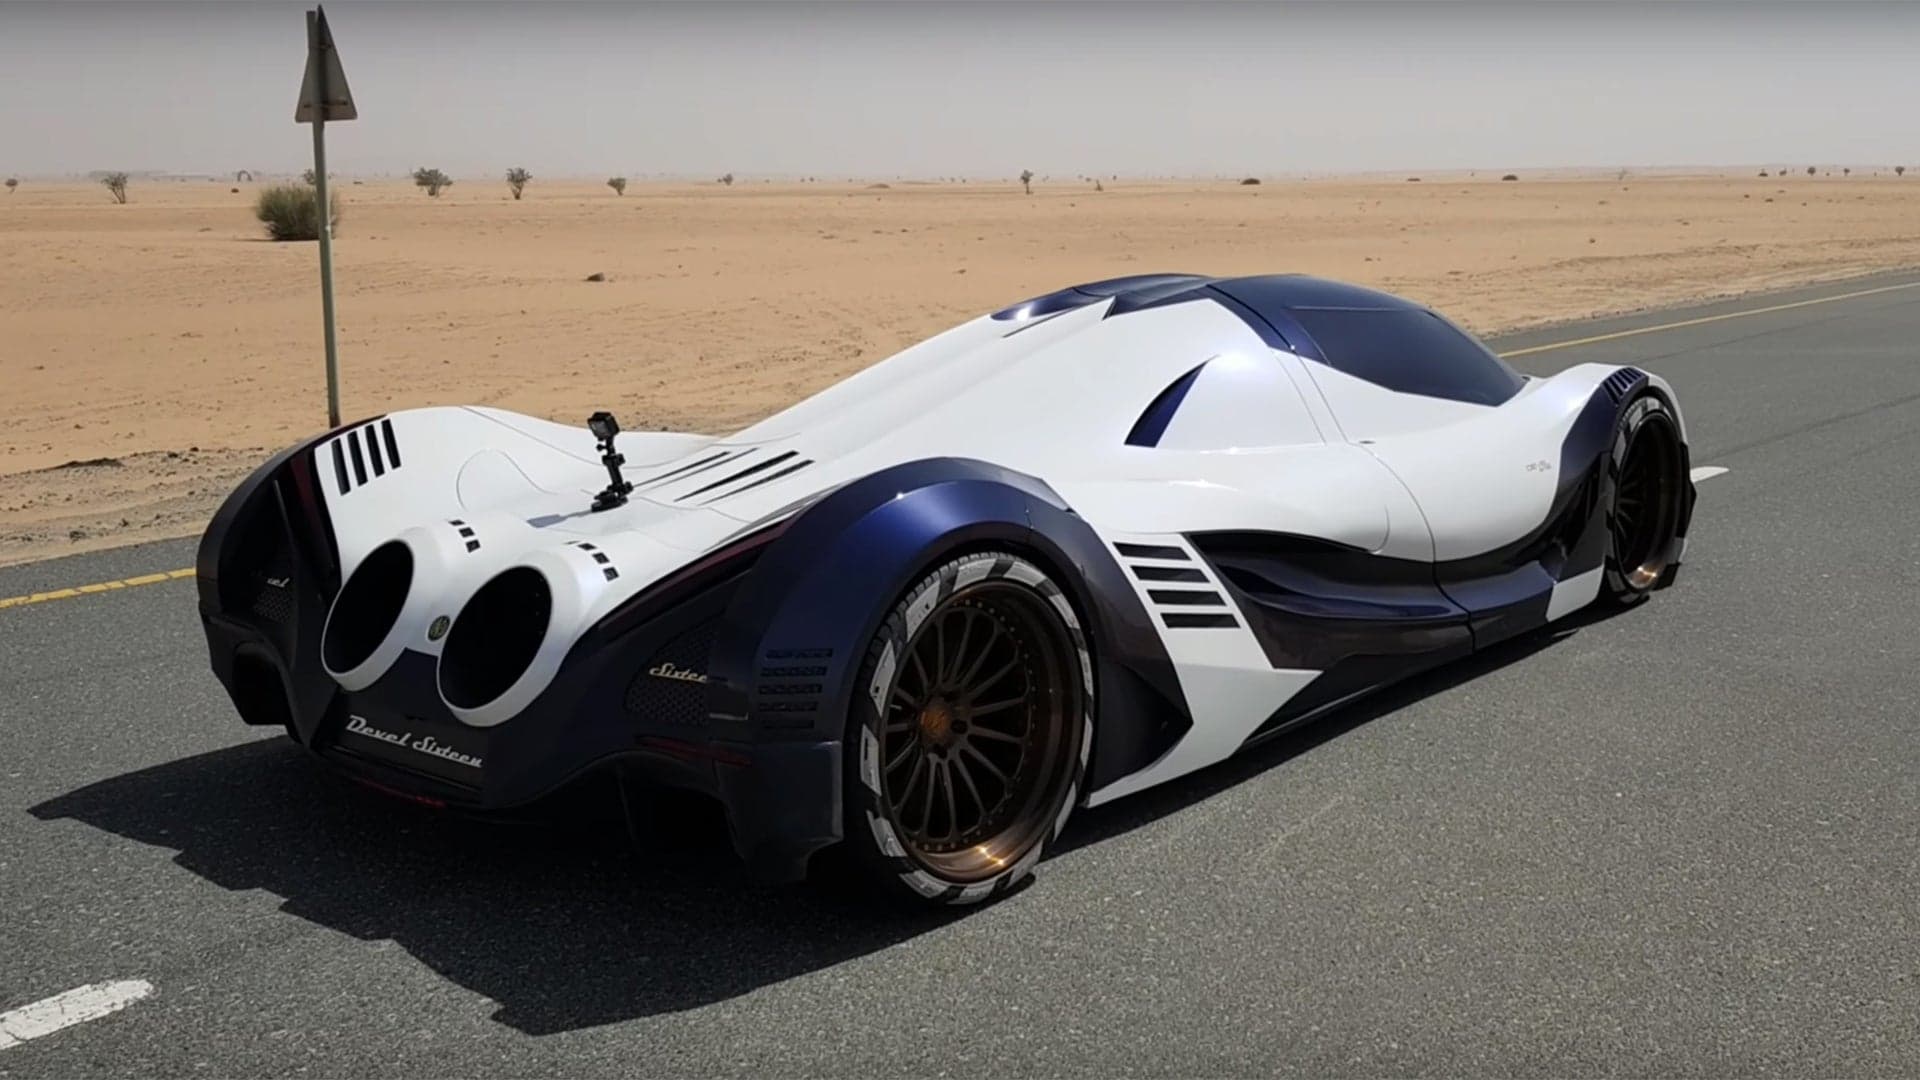 Acceleration Video Shows the Insane 5,000-Horsepower Devel Sixteen Hypercar Is Real